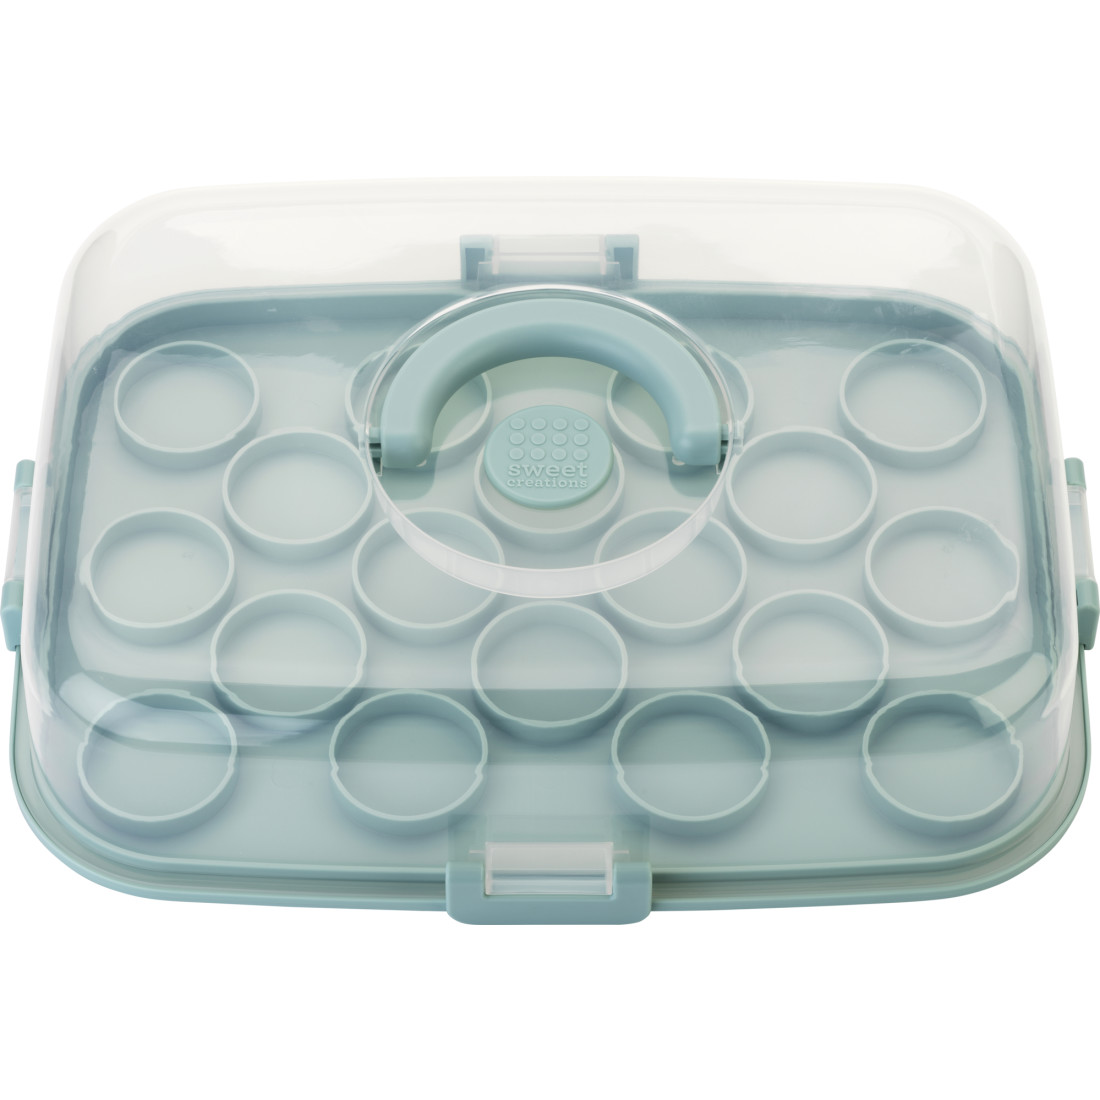 LocknLock 9x13 Cake Carrier with Deviled Egg & Cupcake Inserts 